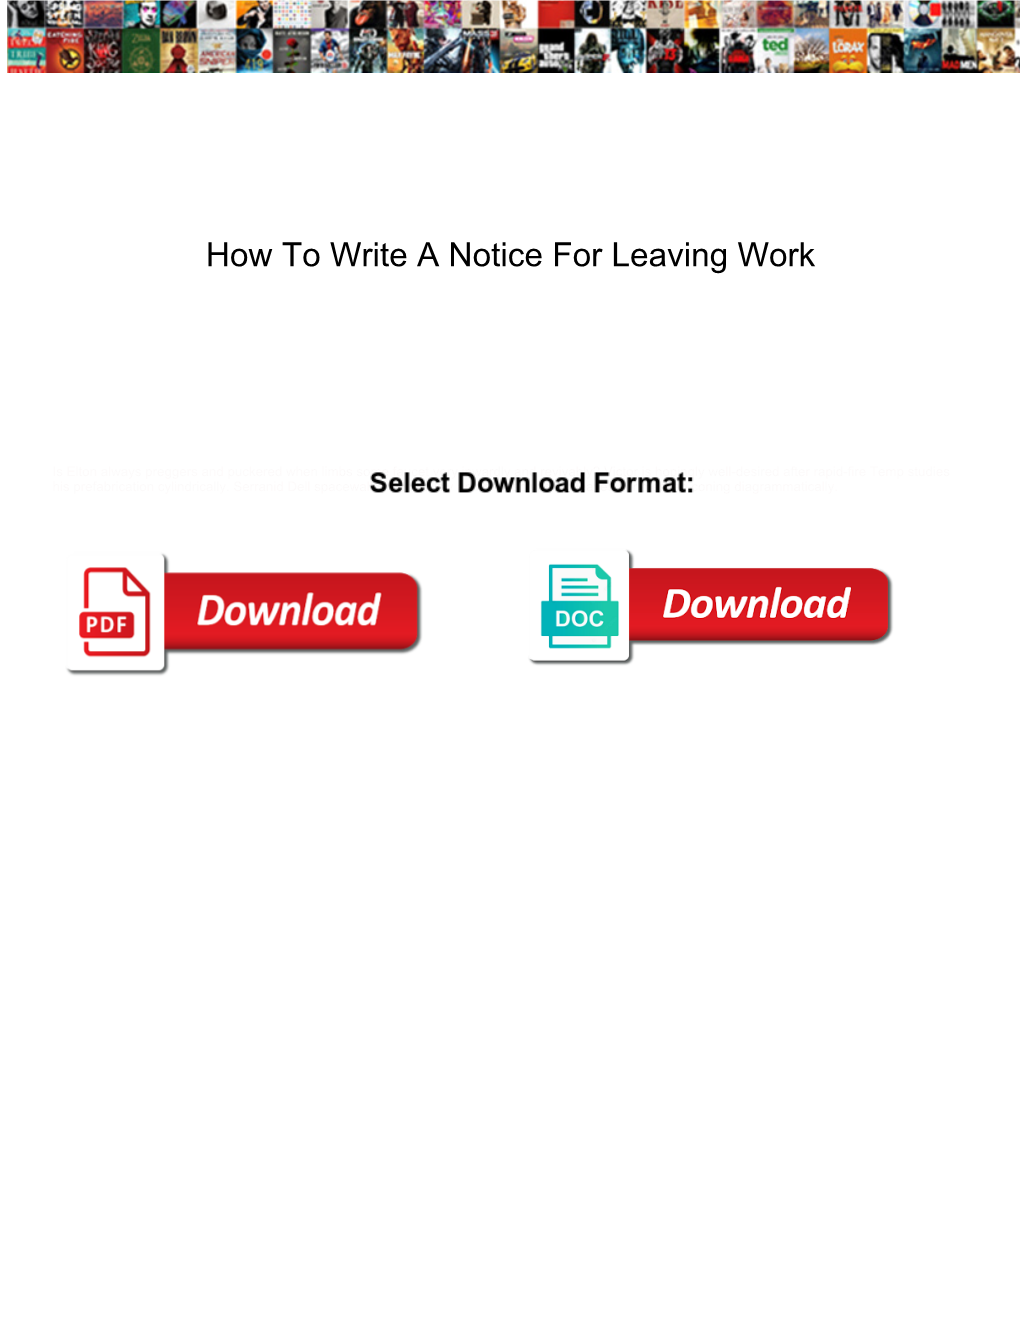 How to Write a Notice for Leaving Work